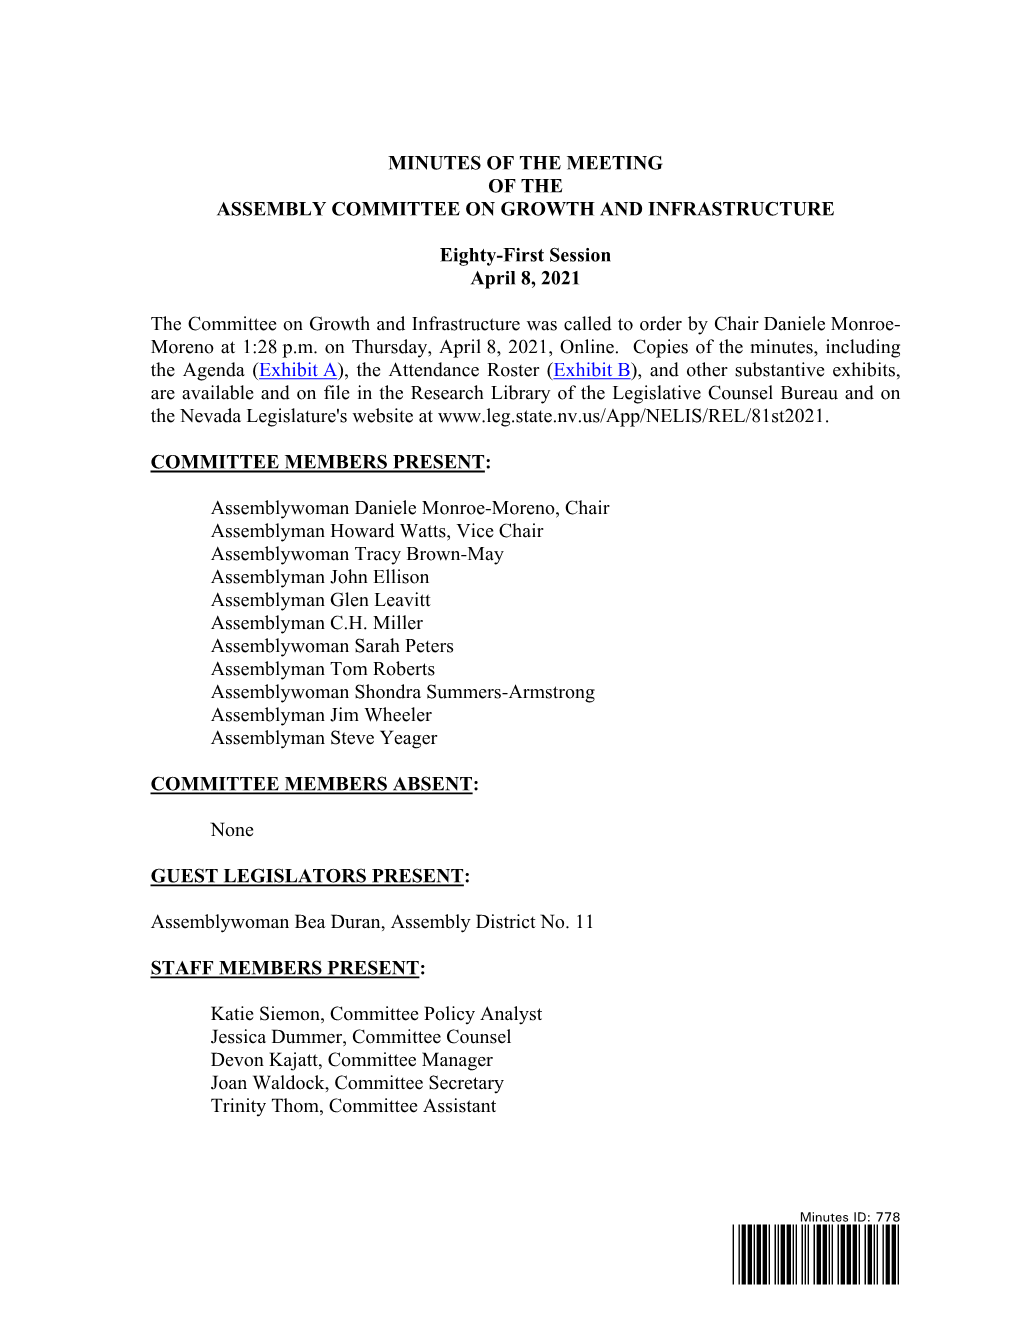 Assembly Committee on Growth and Infrastructure-4/9/2021